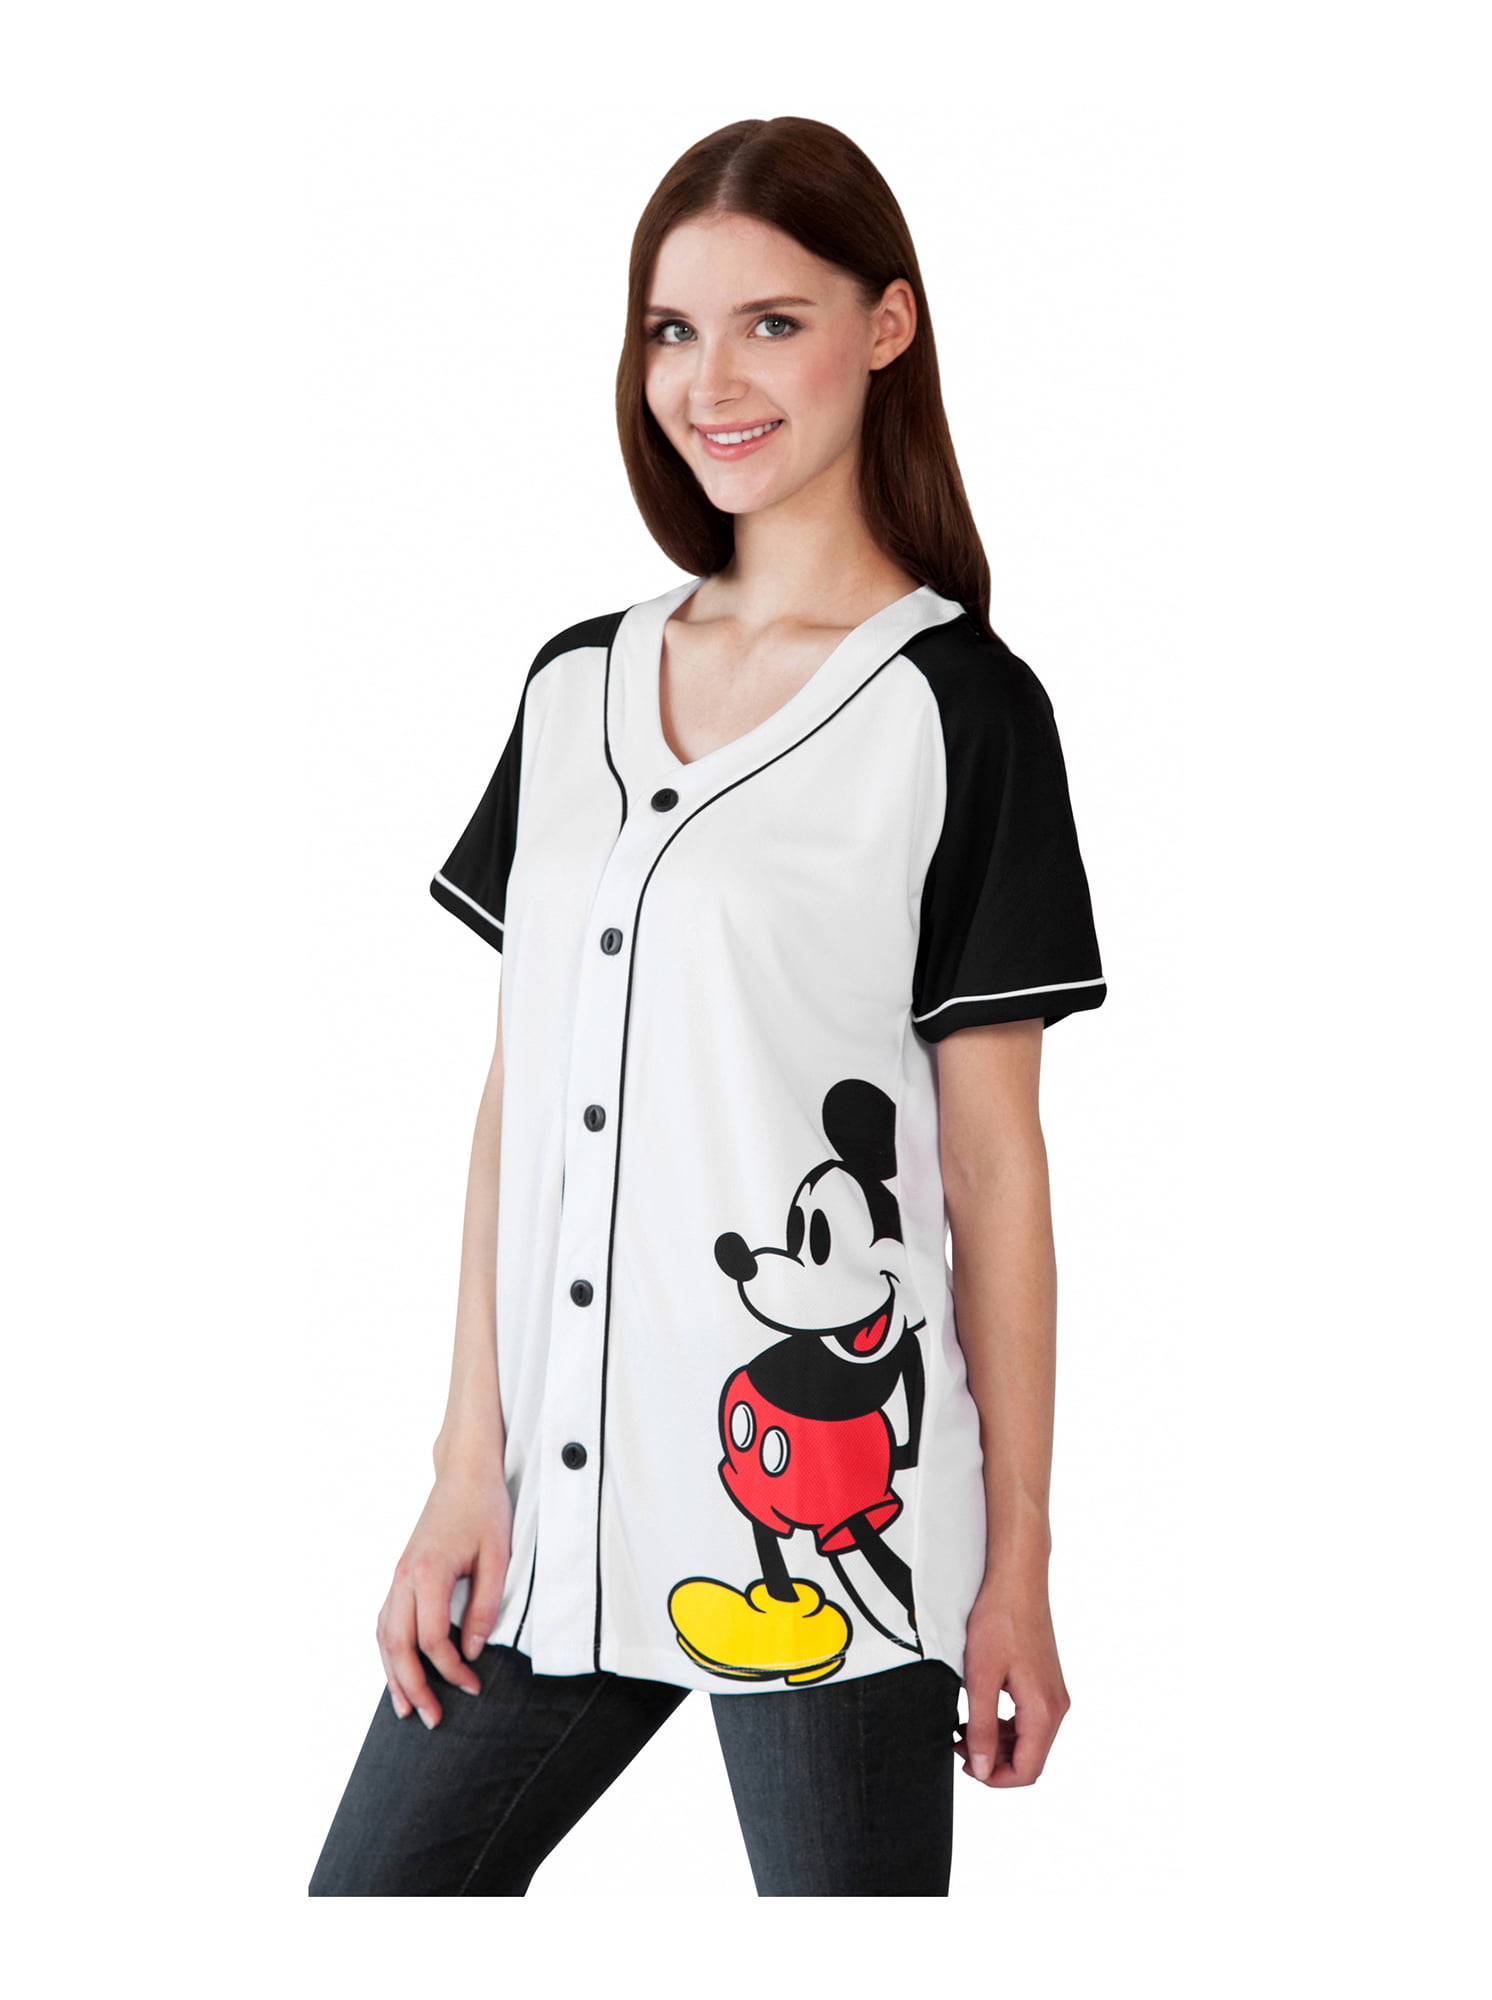 mickey mouse jersey